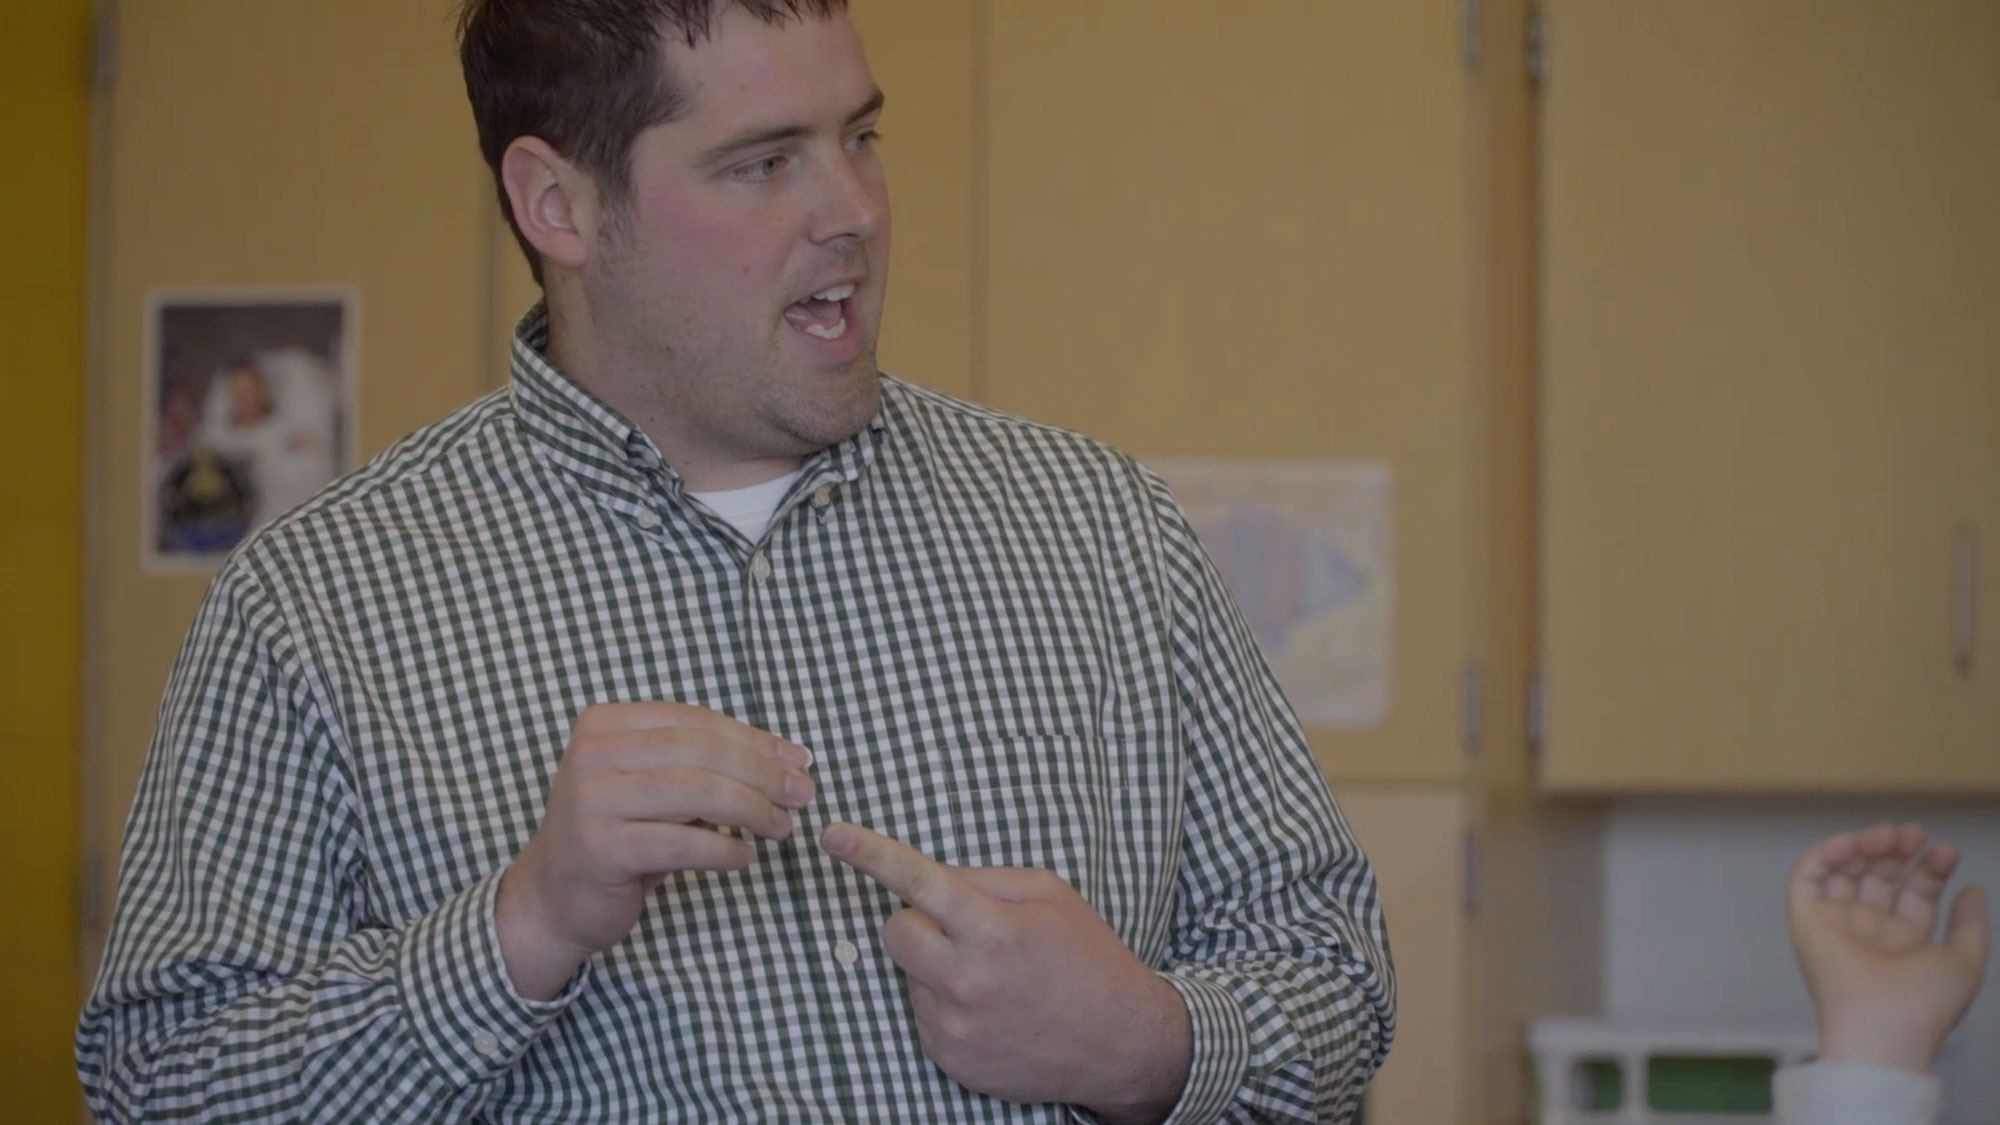 Watch Joel Bescancon, former student, share his story